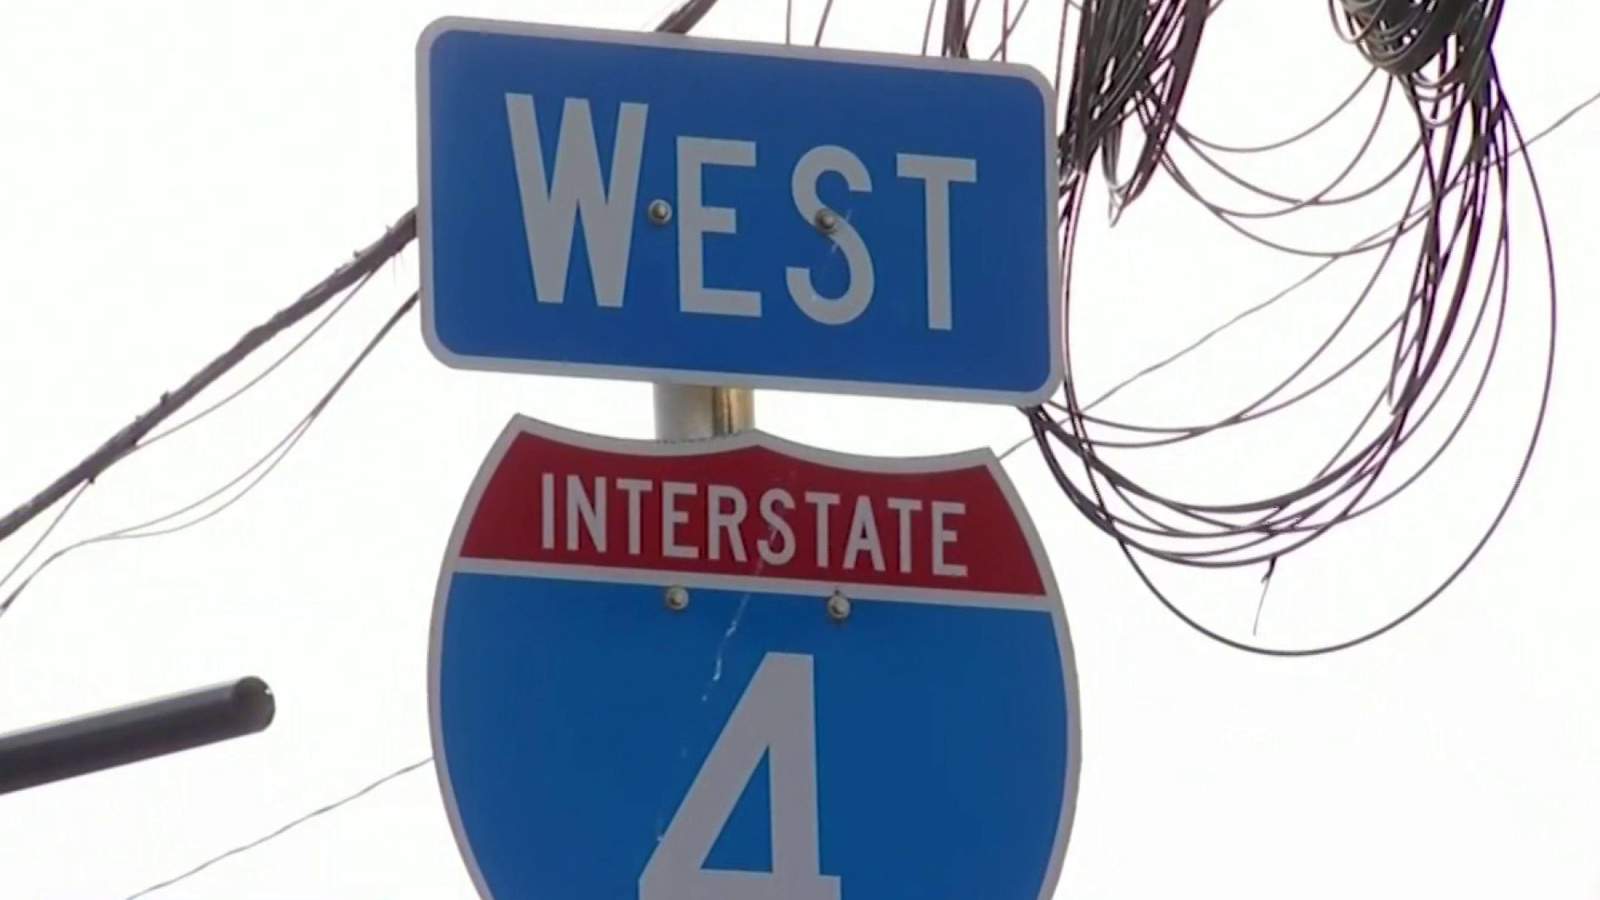 I-4 Ultimate closes Lee Road on-ramp, Fairbanks off-ramp for temporary lane shift